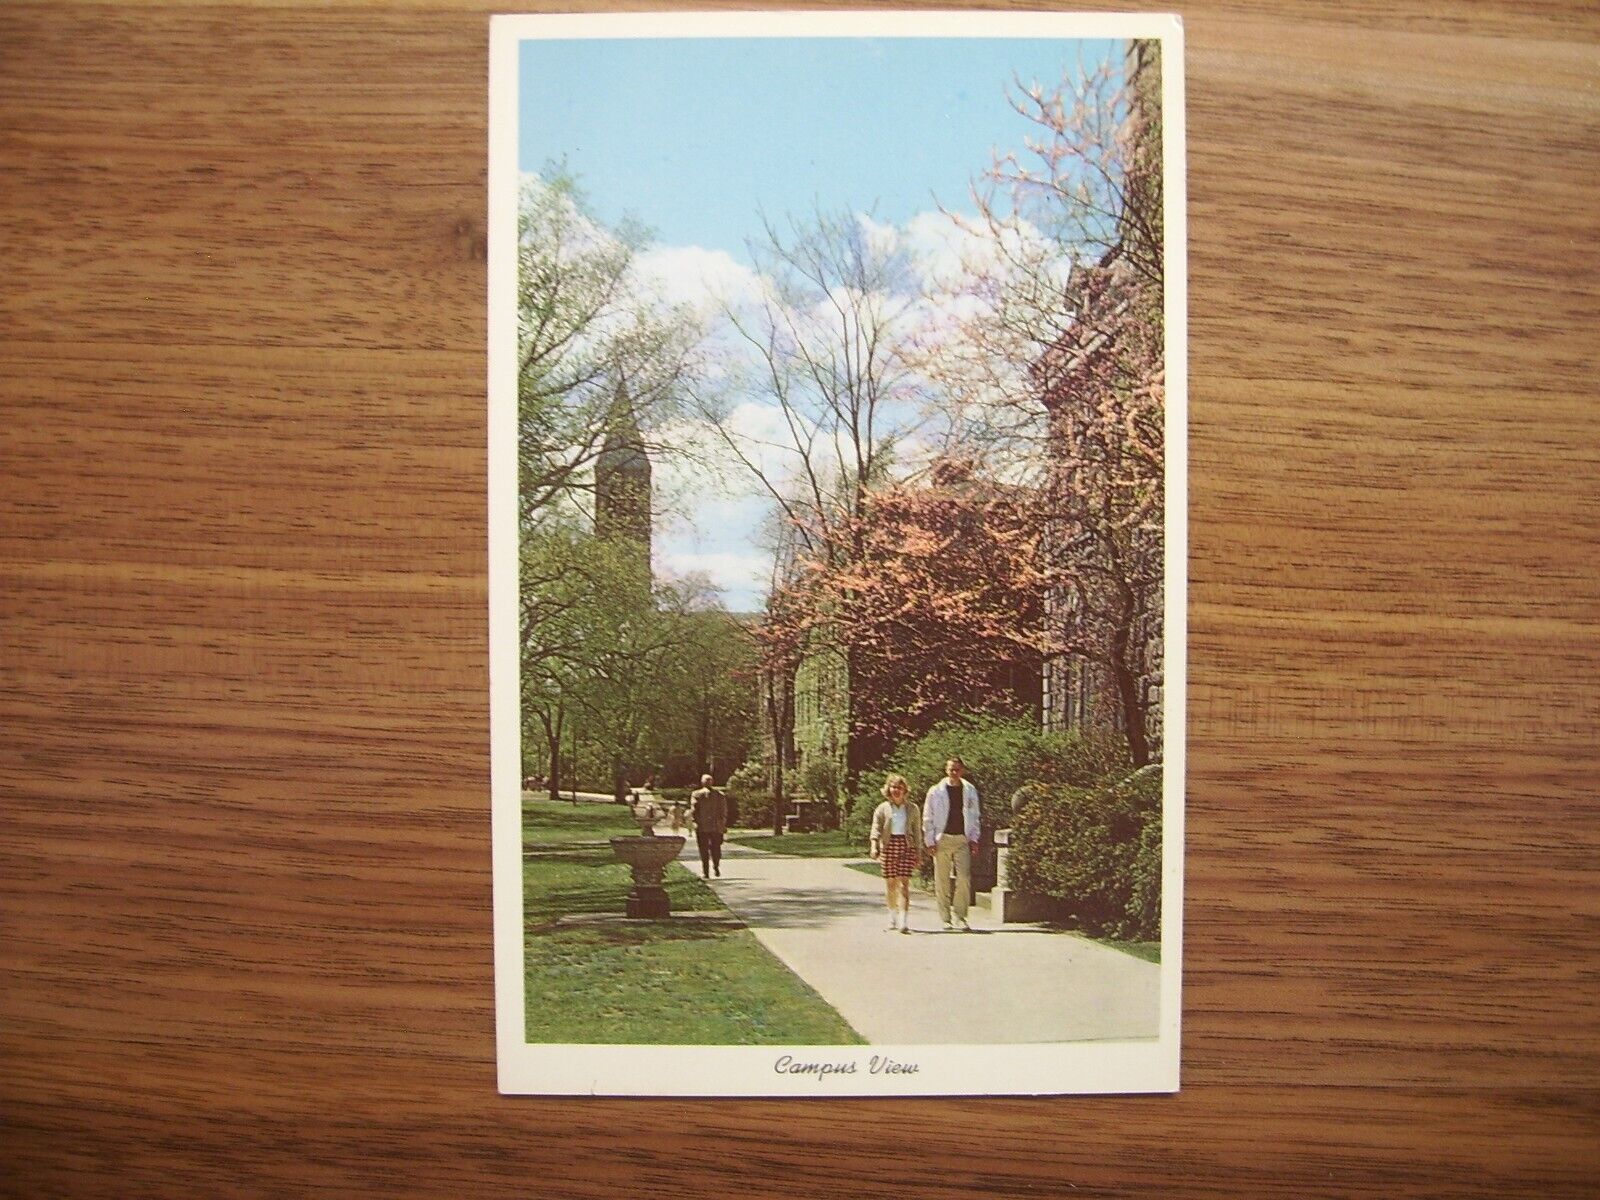 Campus View At Cornell University Ithaca, New York Vintage Postcard Unposted